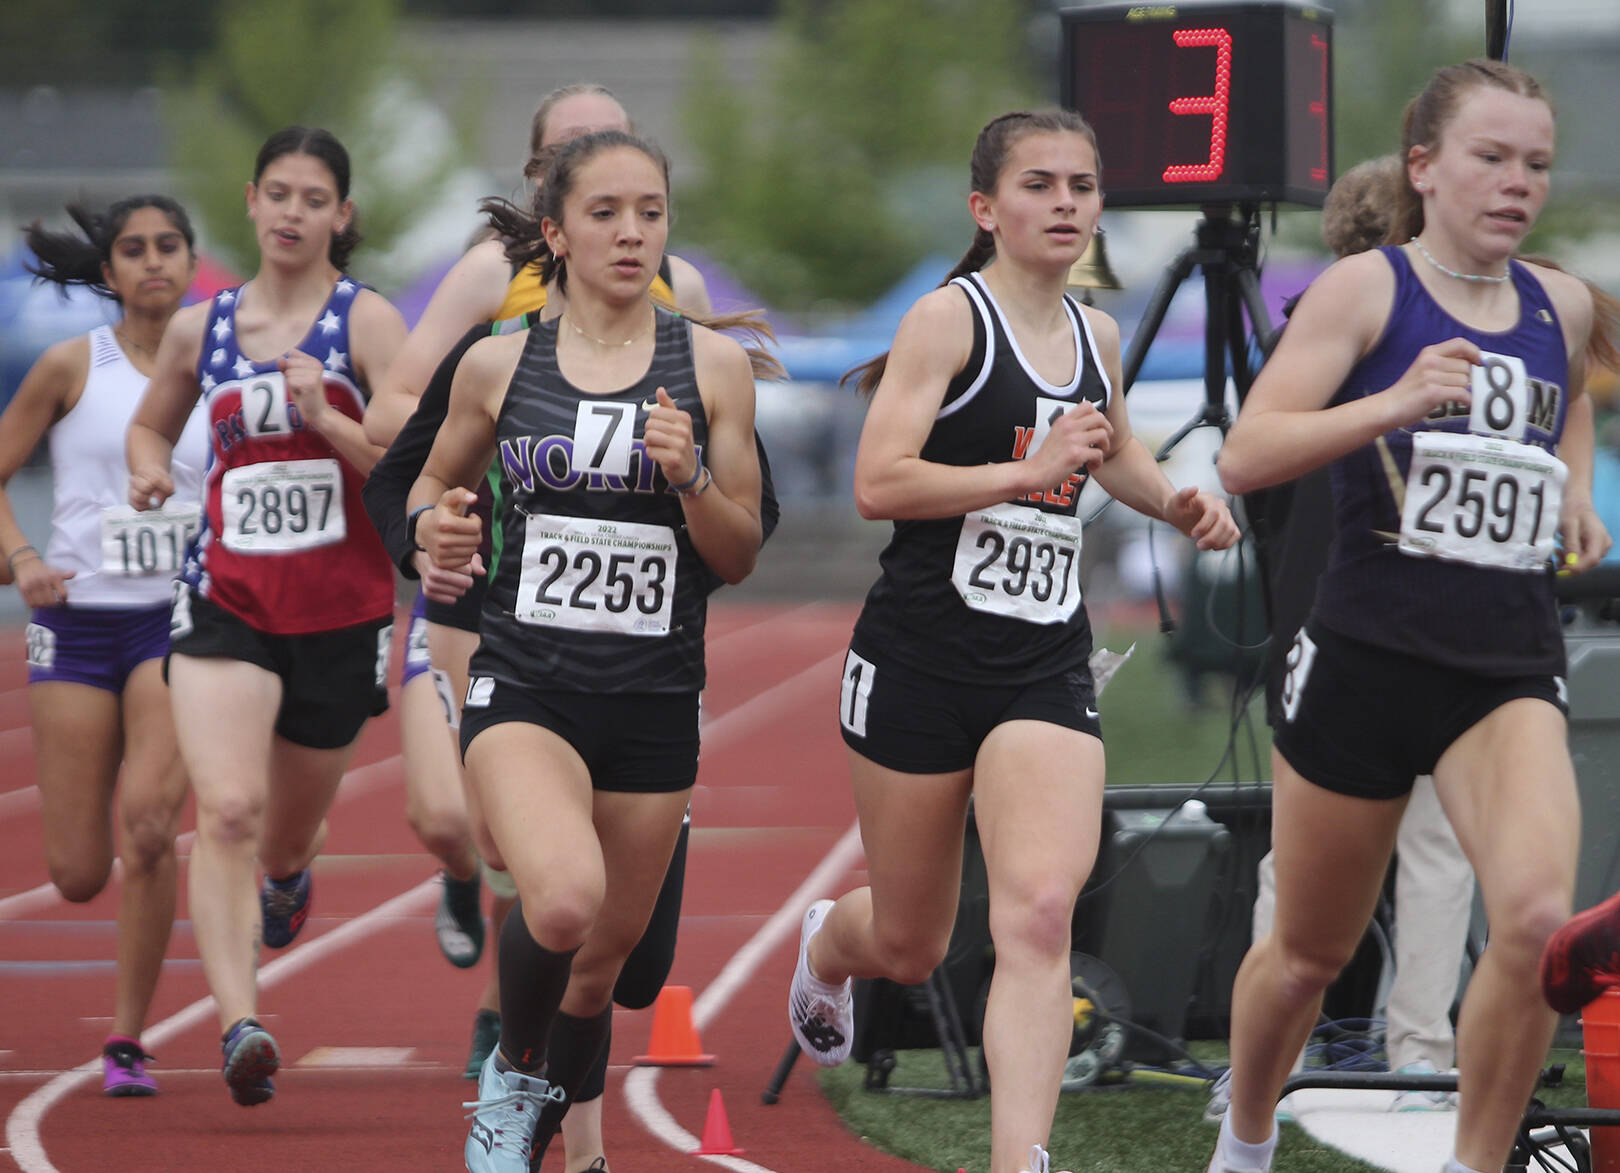 Salix Wartes-Kahl of NK placed second to lead the Vikings at state. Steve Powell/North Kitsap Herald photos